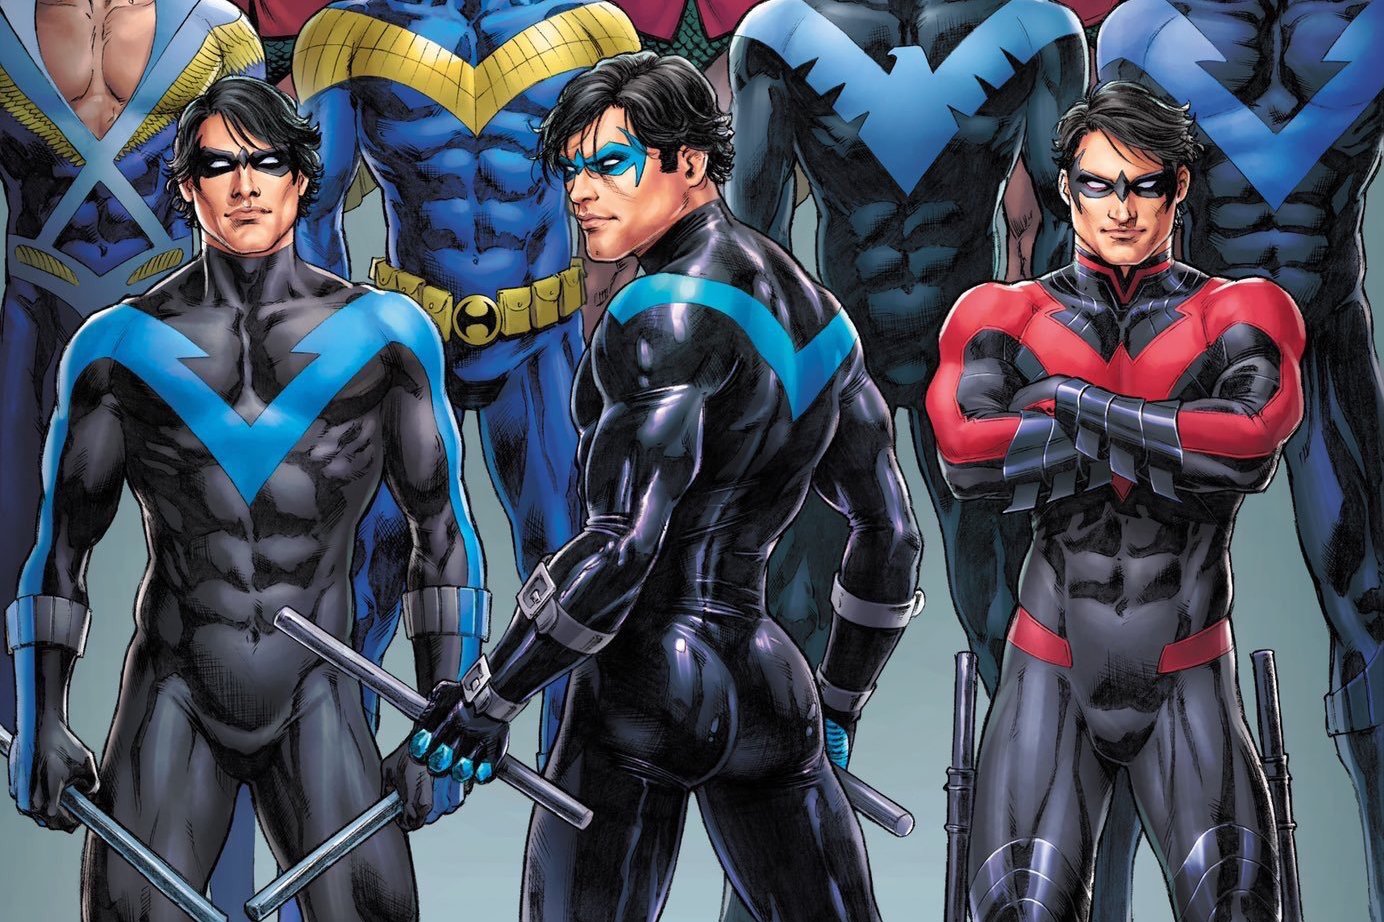 Art of Nightwing through his various costumes and eras. In most cases he is posed facing the camera, except for center front, where he has his back to the viewer, looking over his shoulder. His rear is lovingly rendered.